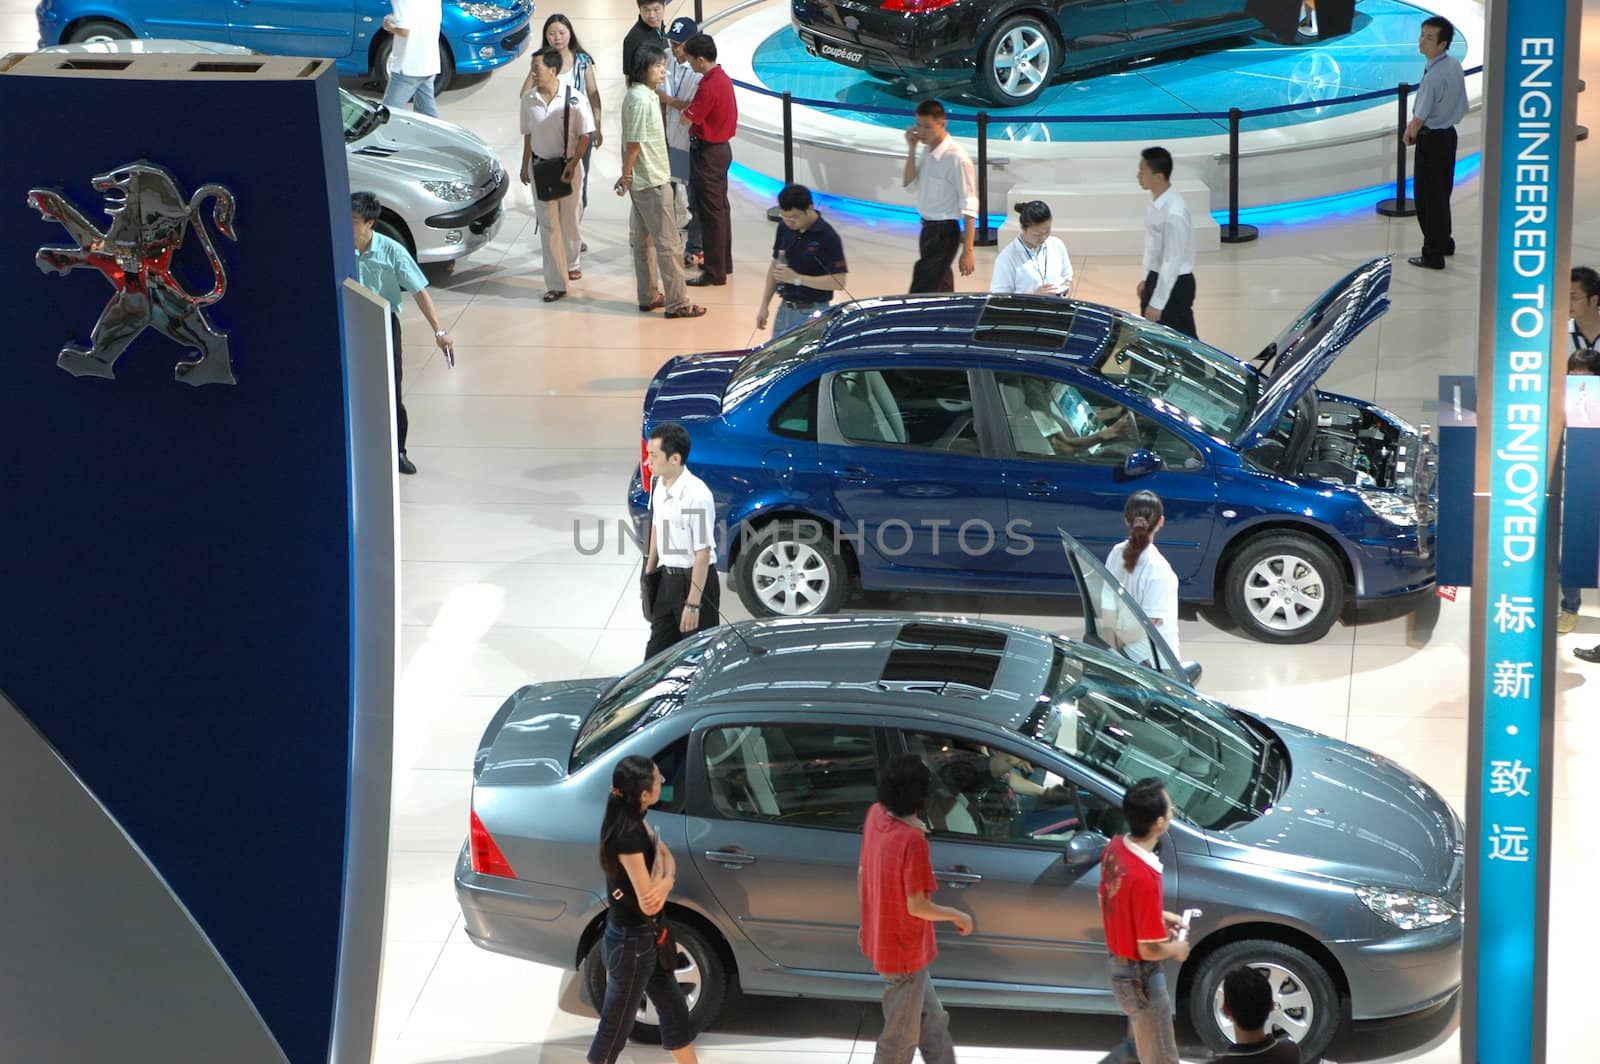 China, Shenzhen Moto - car show in exhibition center. Visitors watching European, American and Chinese cars. Crowd of people interested in newest moto technology.